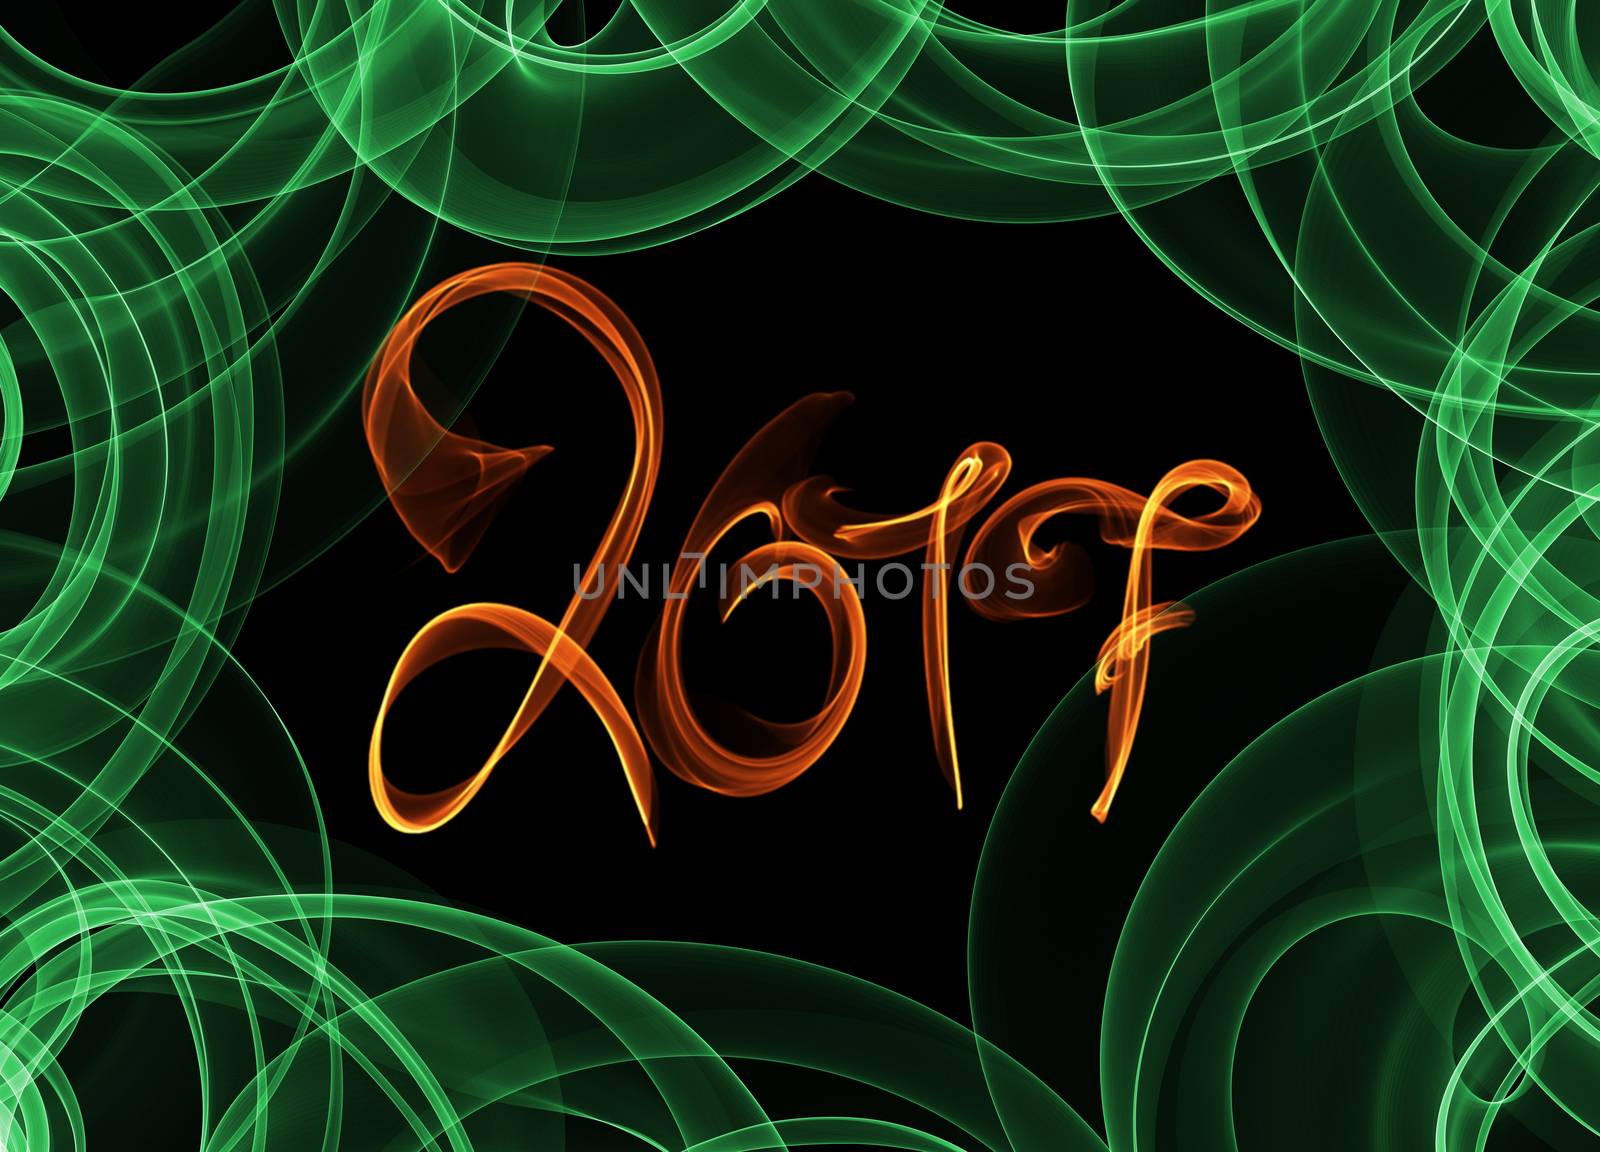 Happy new year 2017 isolated numbers lettering written with fire flame or smoke on black background and green frame by skrotov